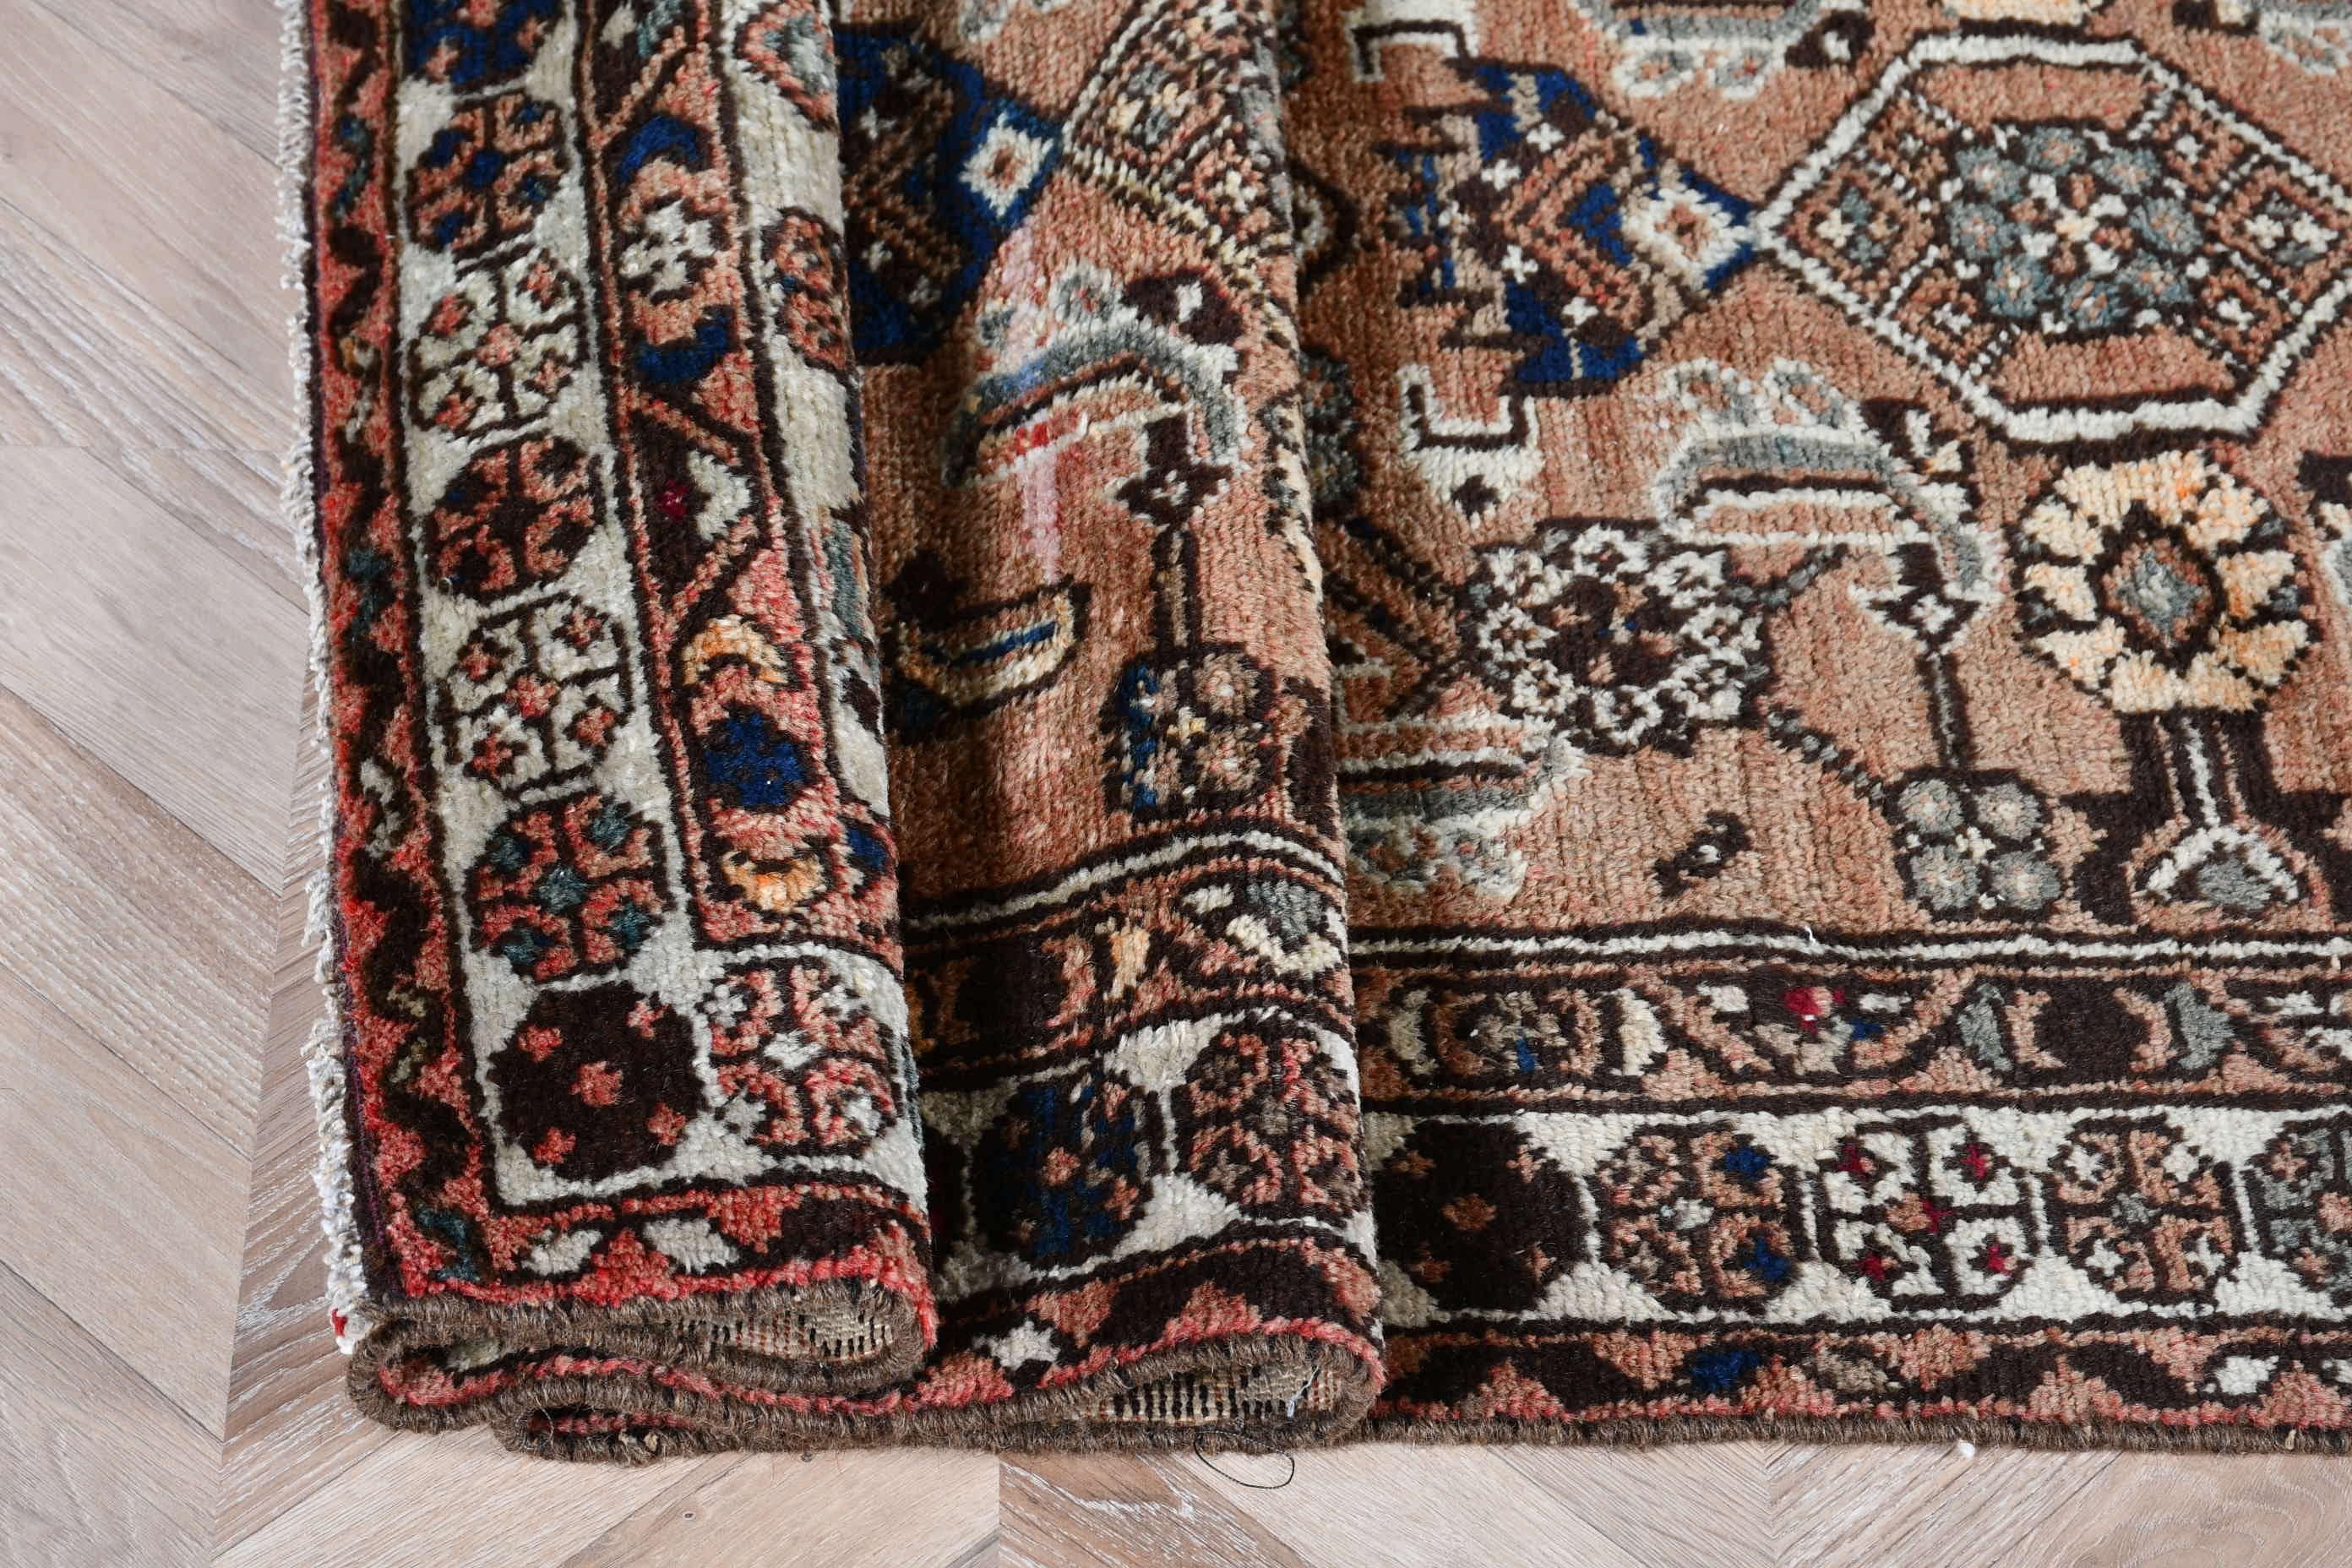 Antique Rug, Brown Home Decor Rugs, Entry Rug, Hand Woven Rug, Turkish Rug, Vintage Rugs, Moroccan Rug, Kitchen Rug, 2.9x6.1 ft Accent Rug